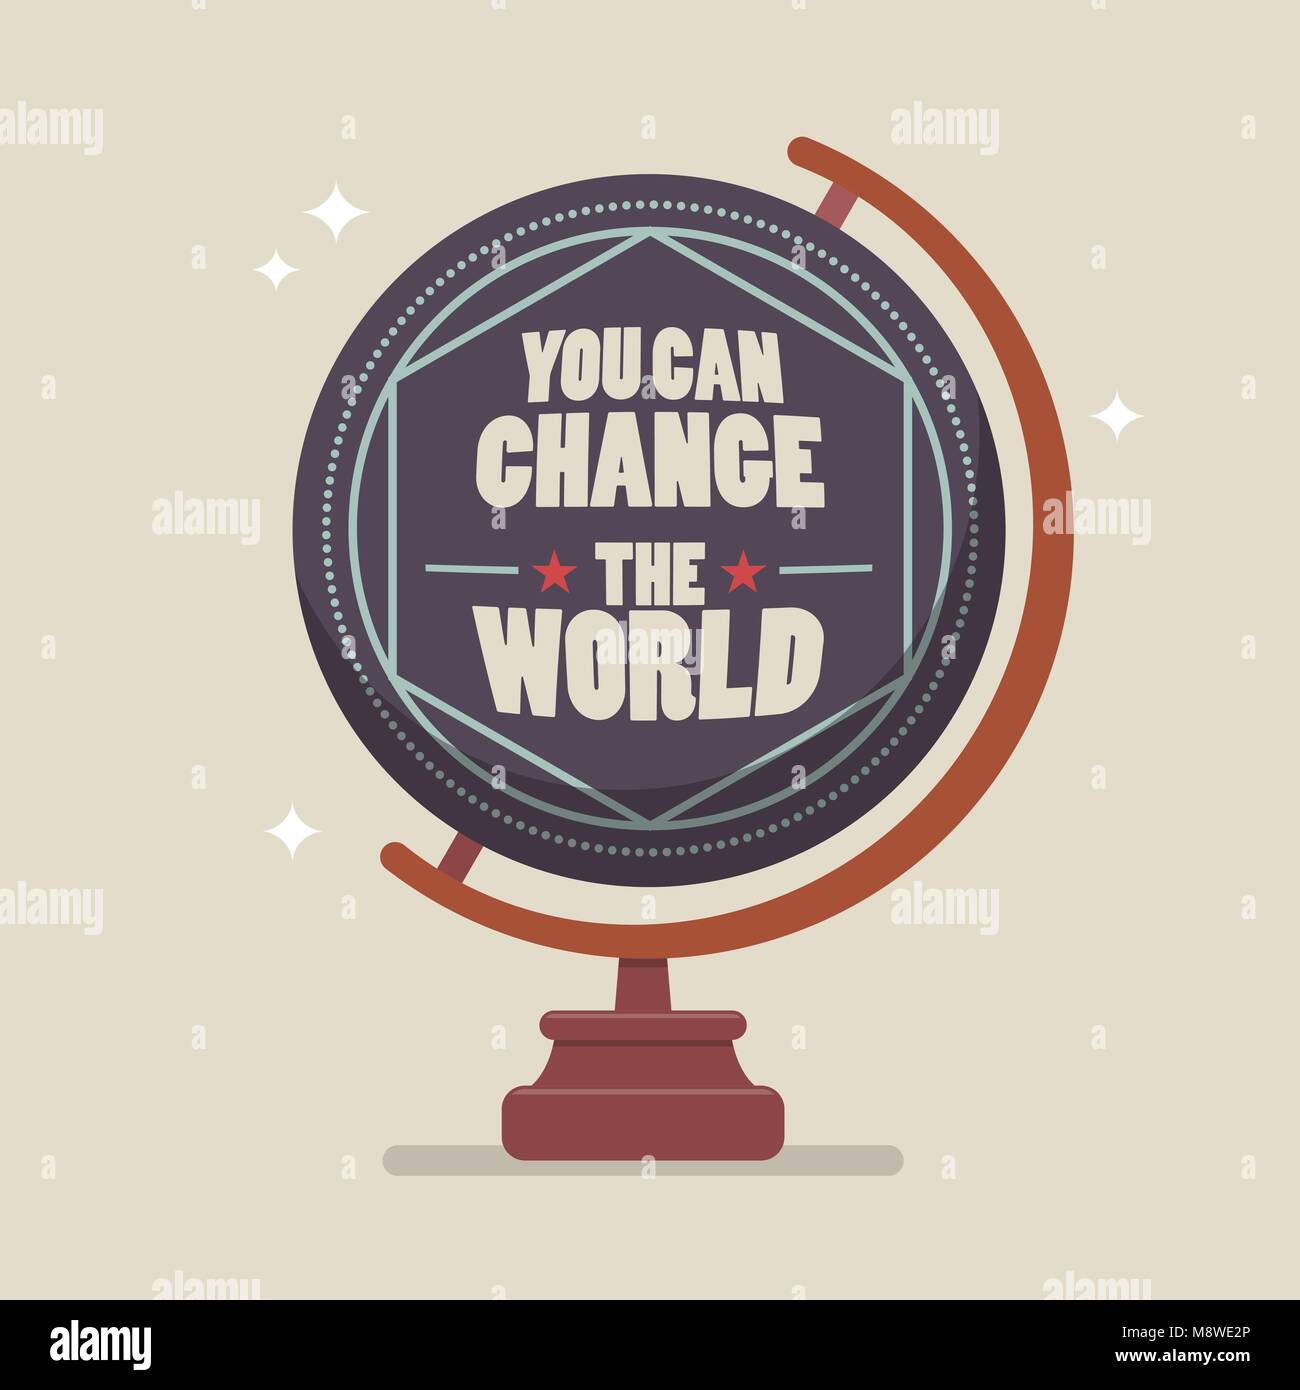 You can change the world lettering on globe model. Vector illustration Stock Vector